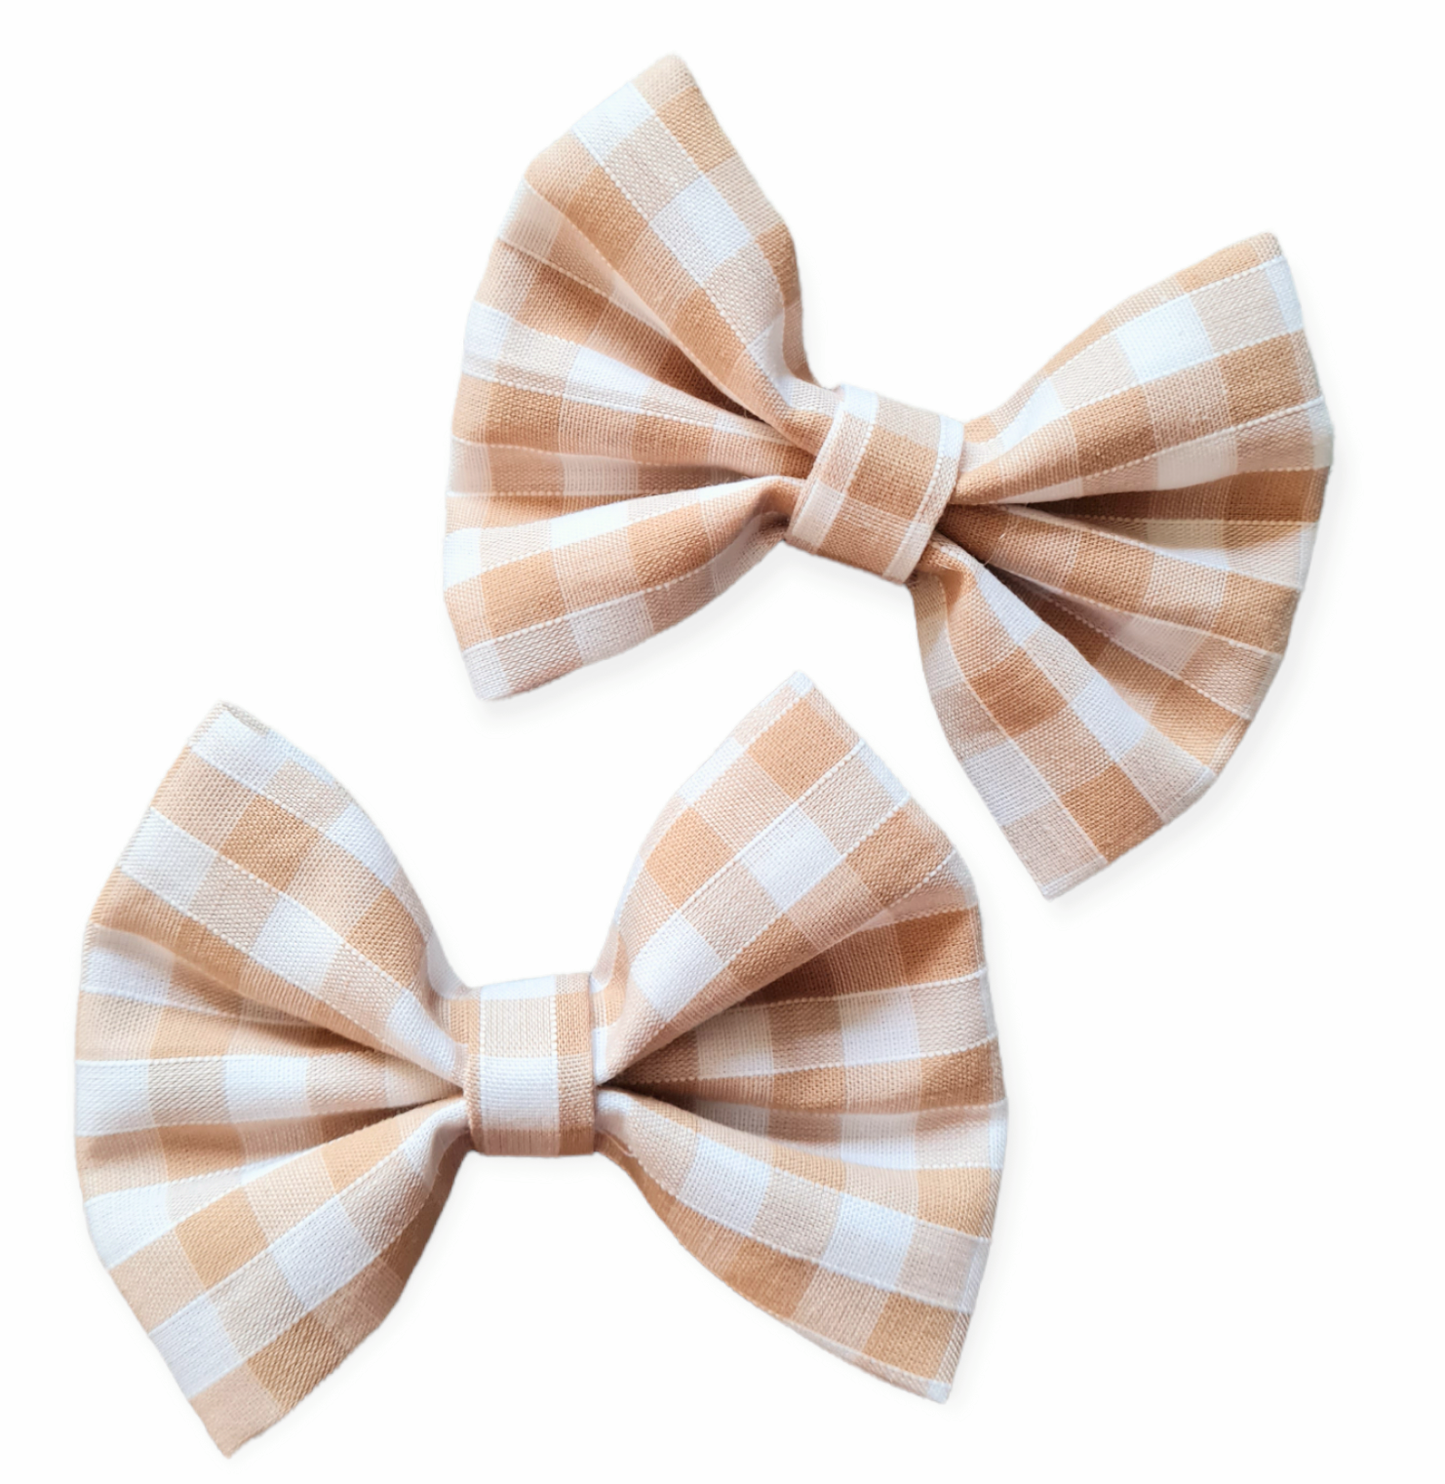 Beige gingham bows